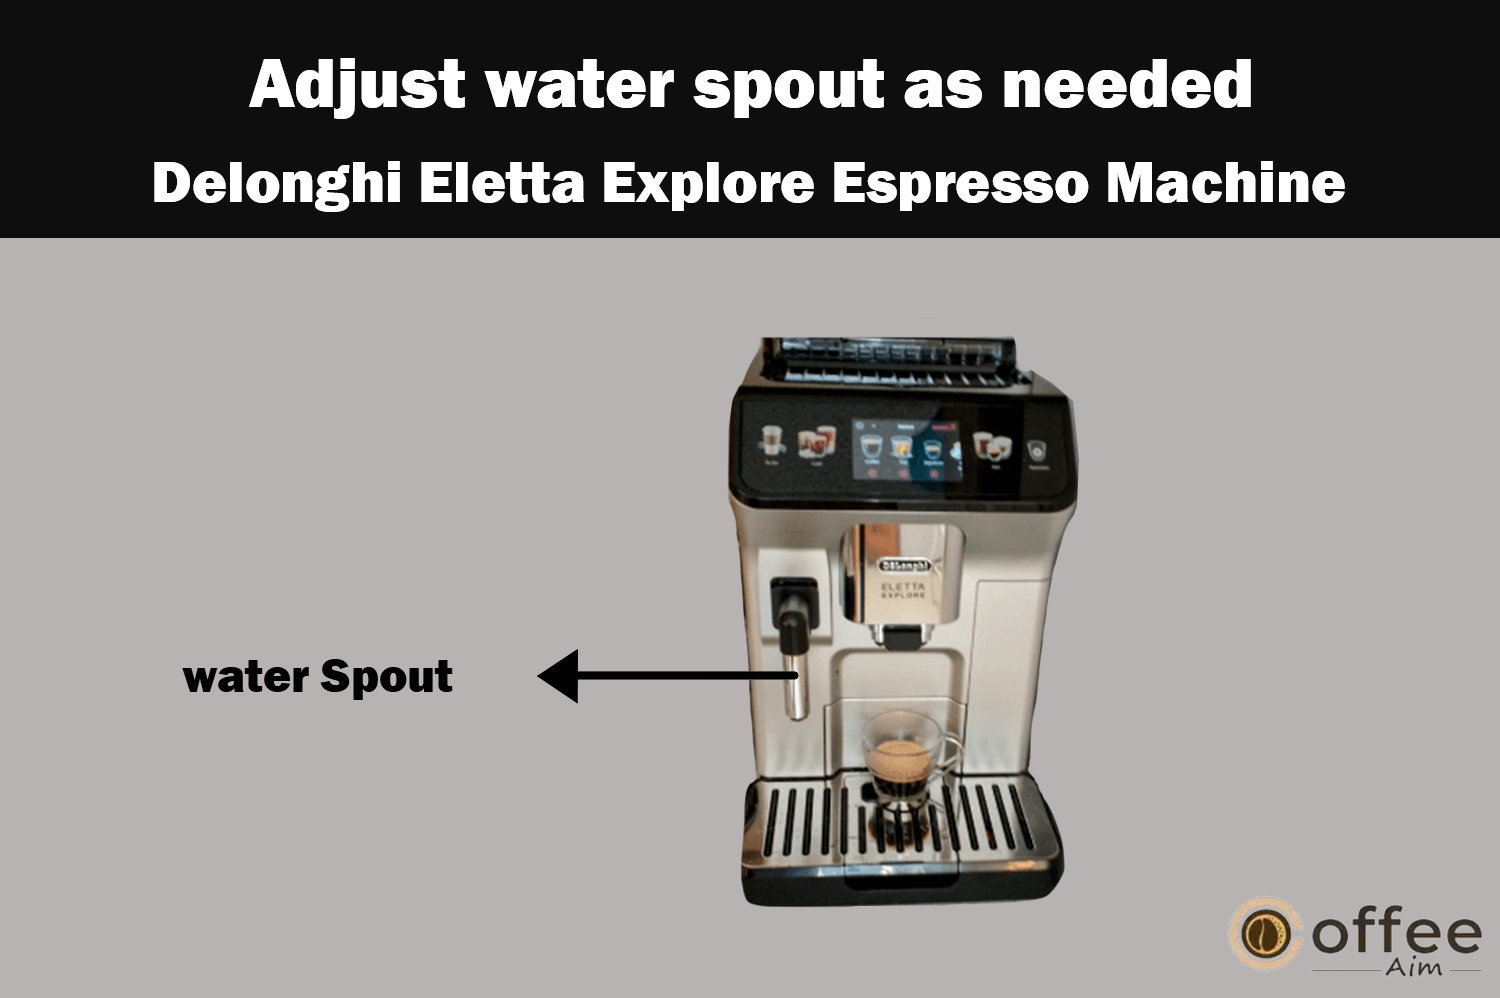 The image illustrates the adjustment of the water spout on the "Delonghi Eletta Explore Espresso Machine," a key step outlined in the article "How to Use the Delonghi Eletta Explore Espresso Machine."